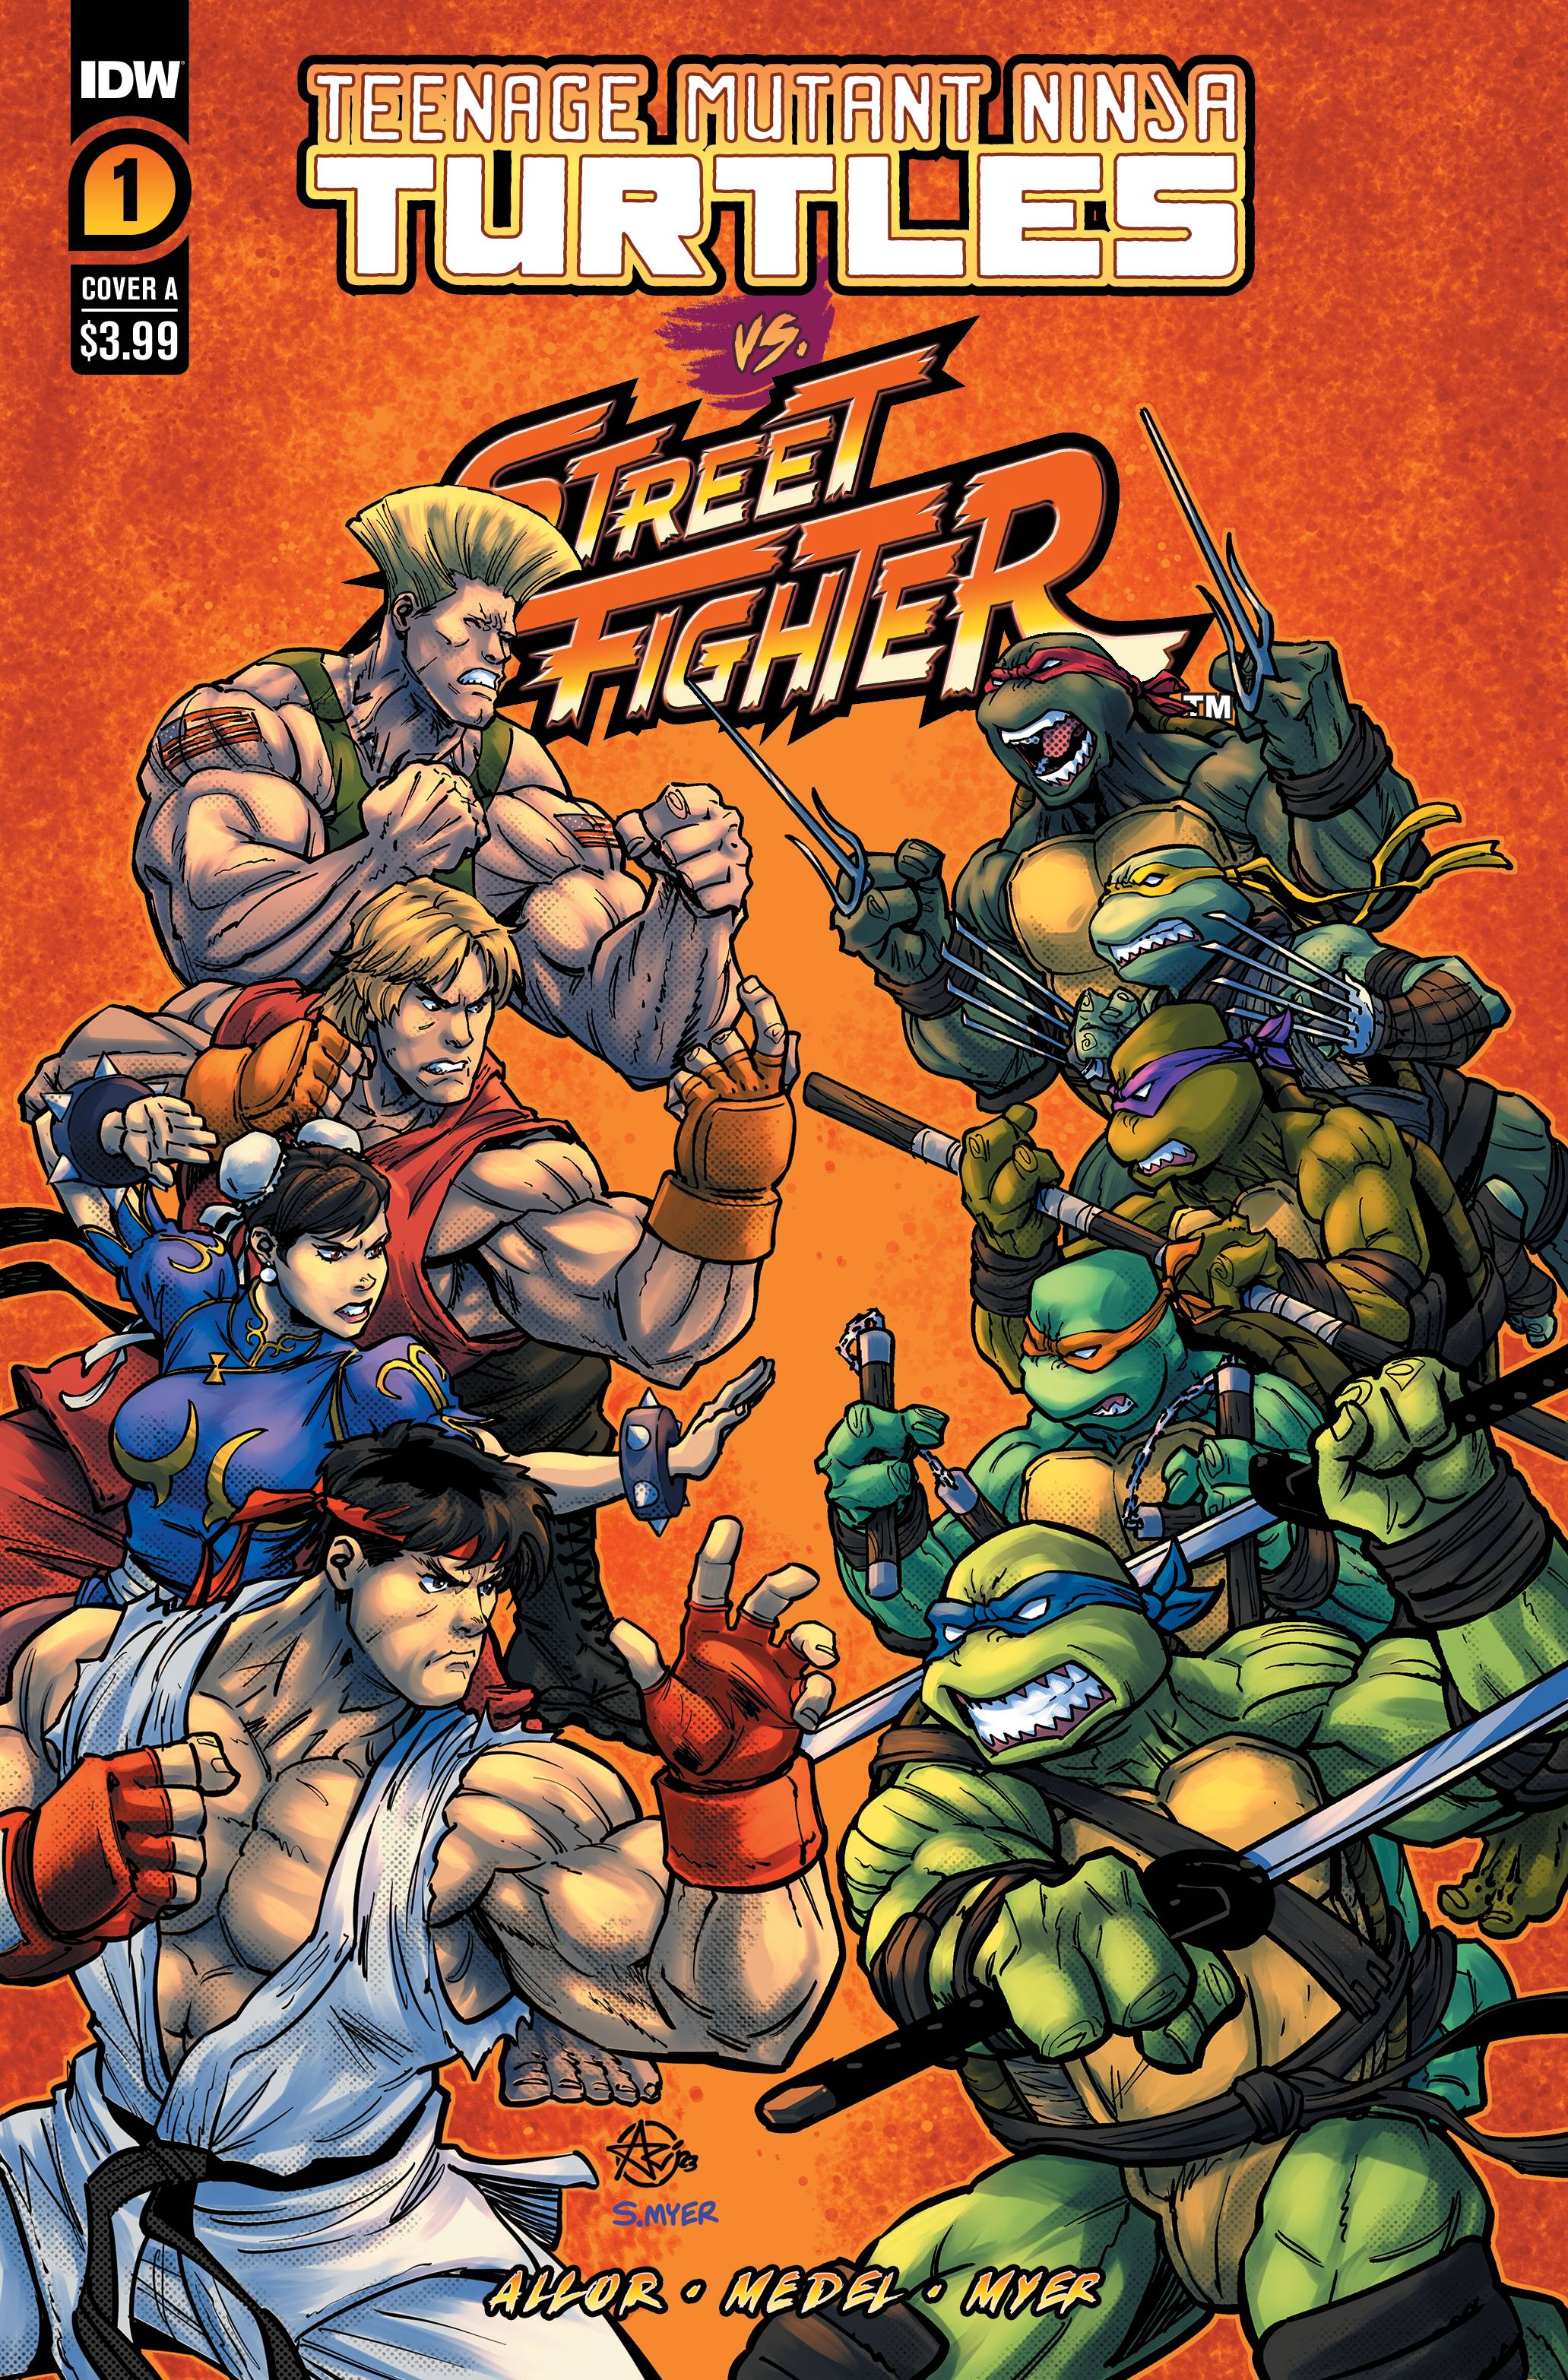 street fighters